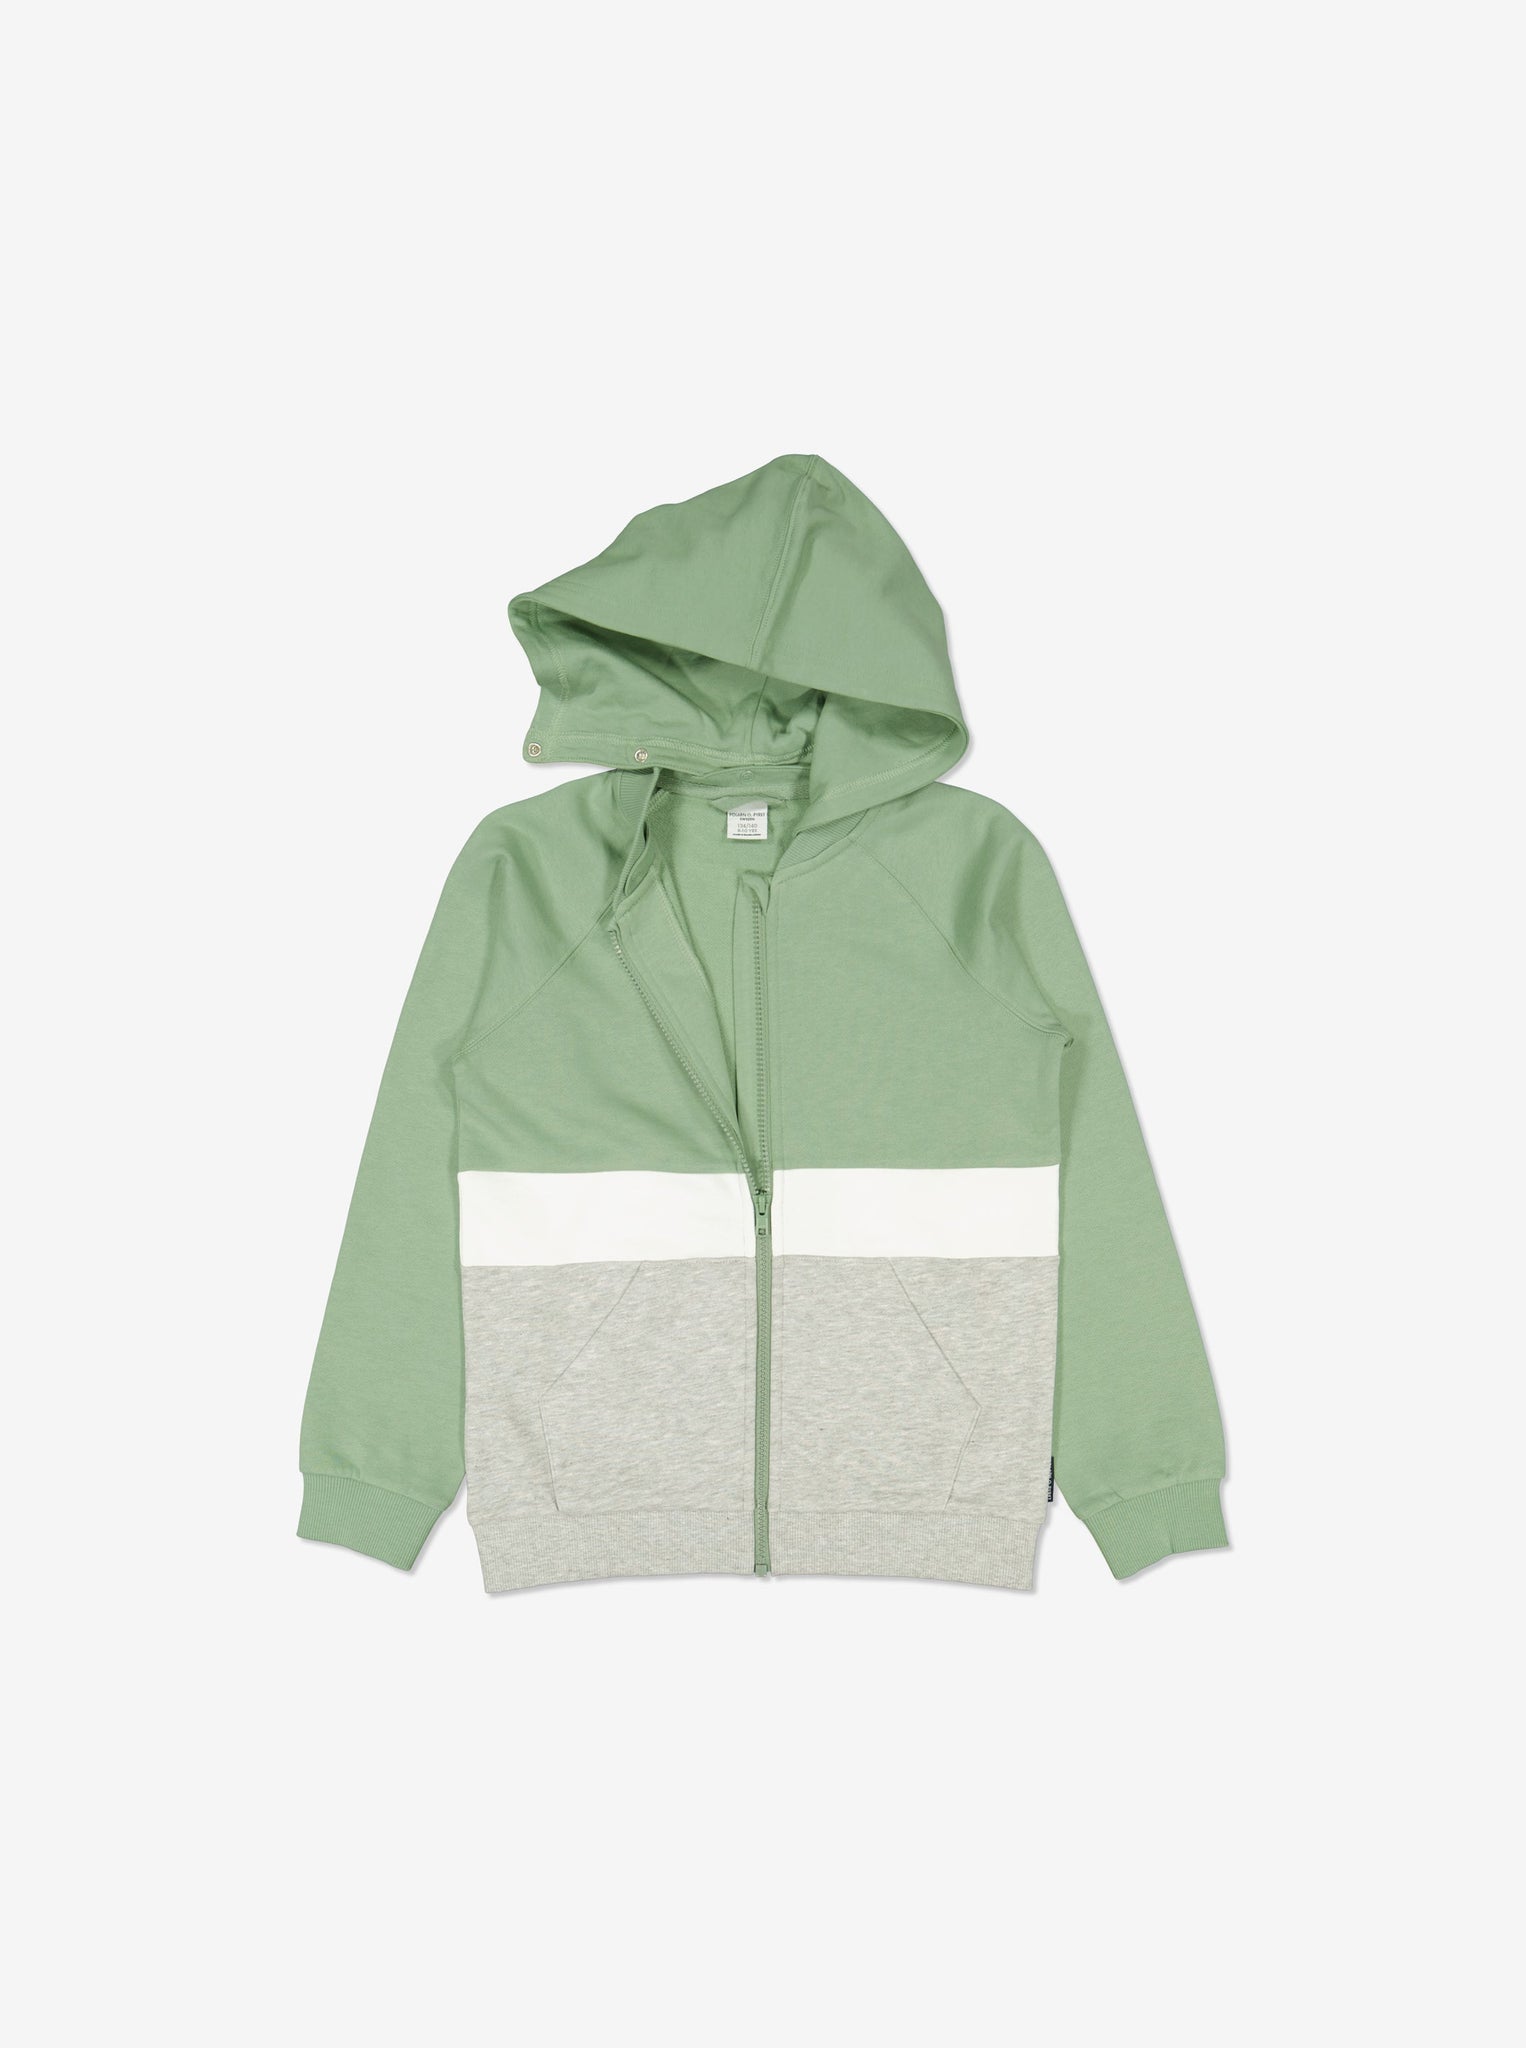  Green Colour Block Kids Hoodie from Polarn O. Pyret Kidswear. Made using environmentally friendly materials.